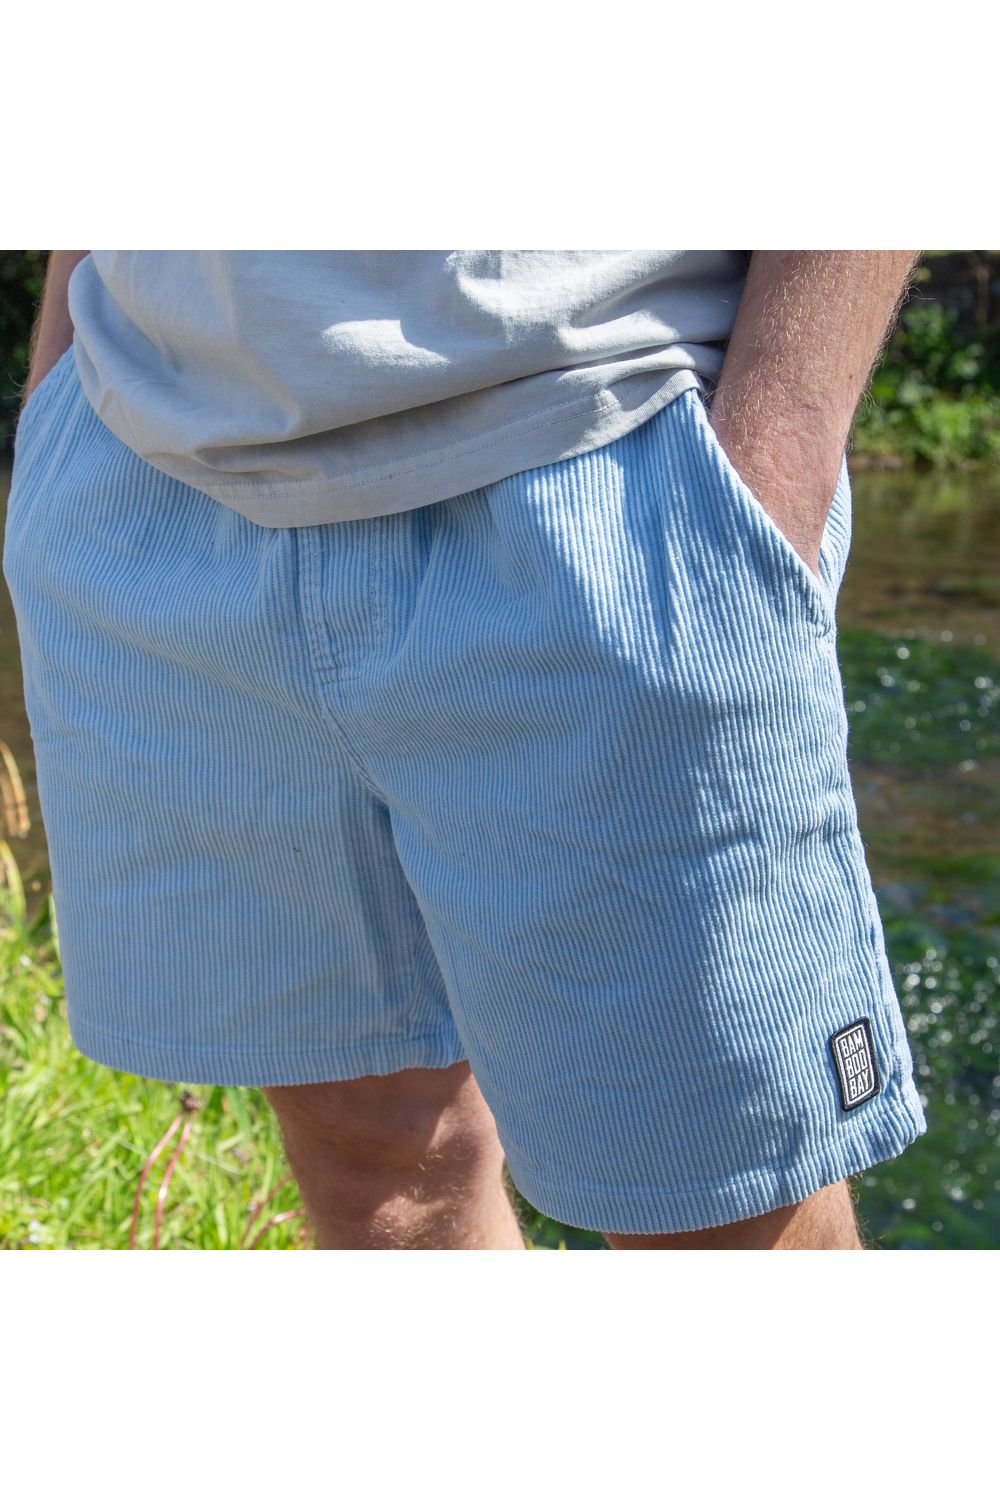 Bamboobay Cord Shorts in Light Blue from Front